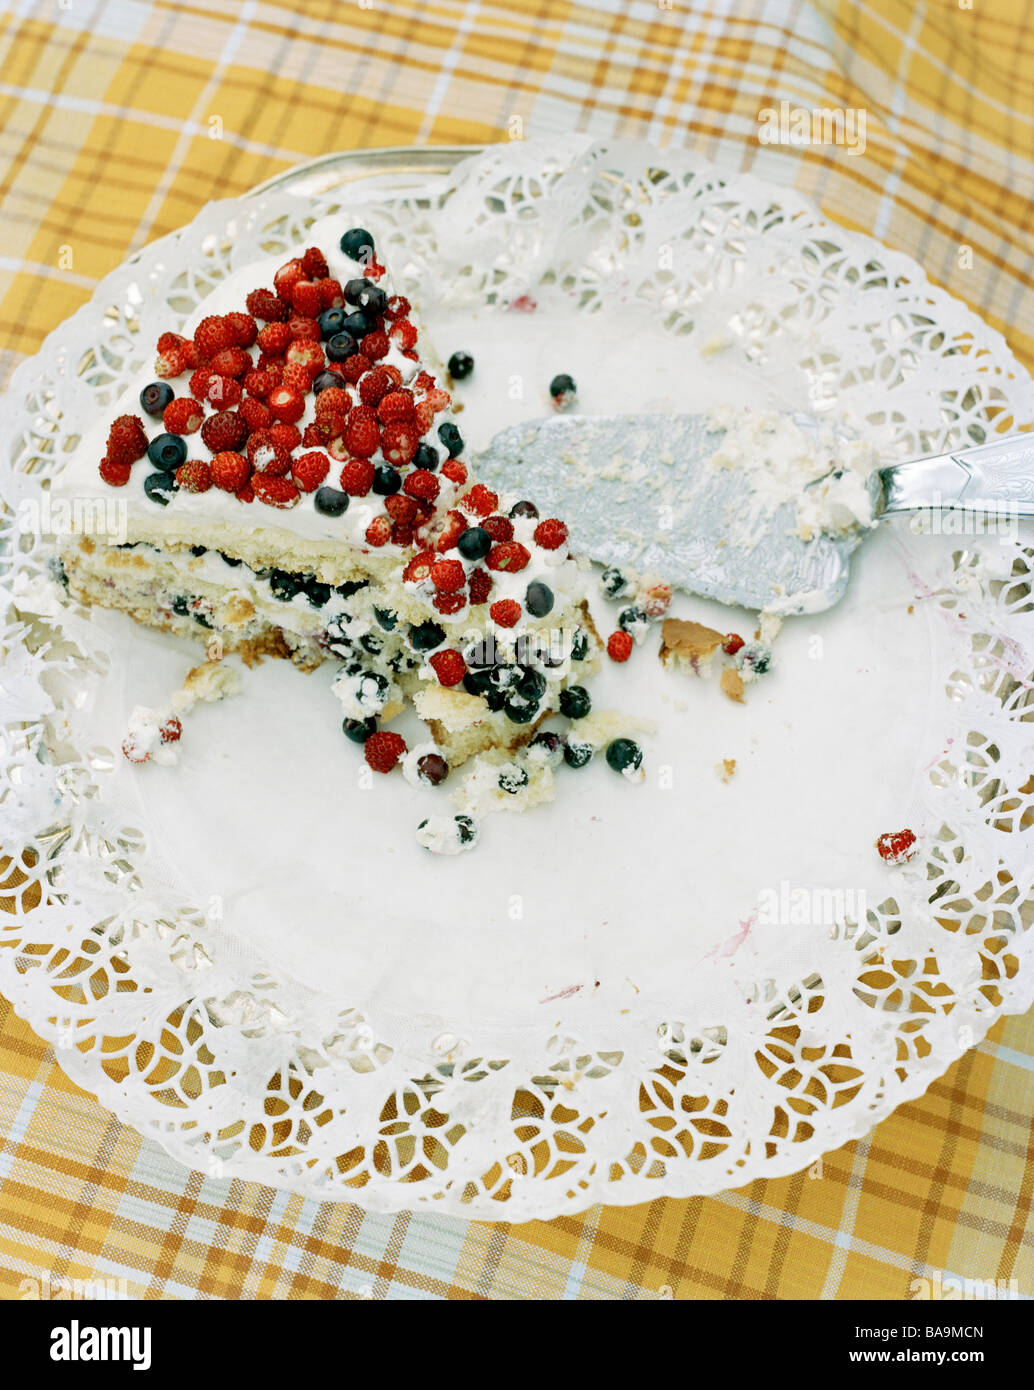 A cake garnished with wild strawberries and bilberries, Sweden. Stock Photo